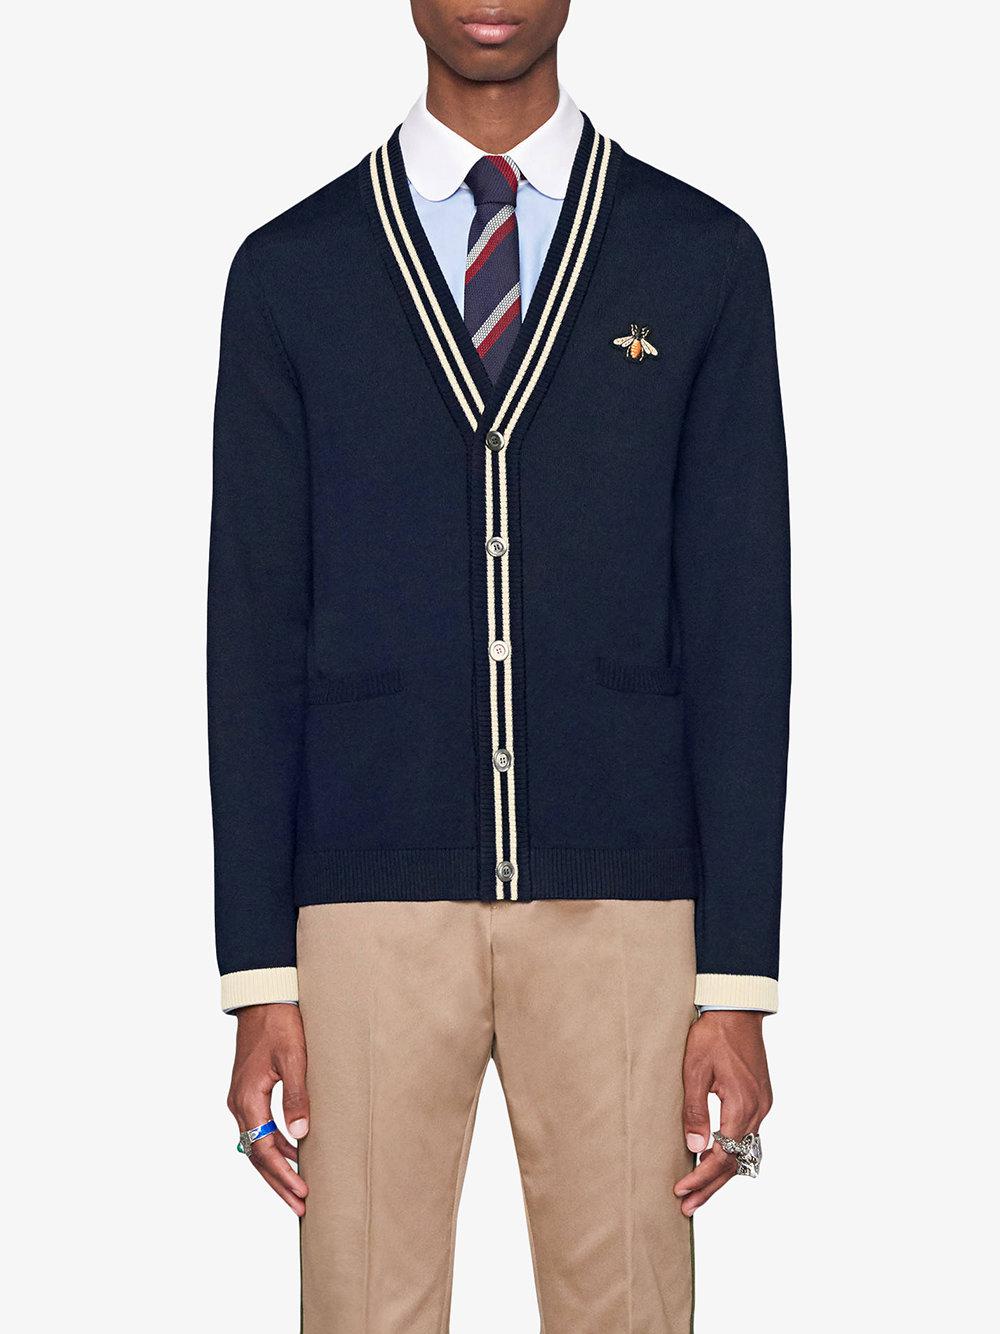 Gucci Cardigan Wool Knit With Bee in Blue for Men - Lyst